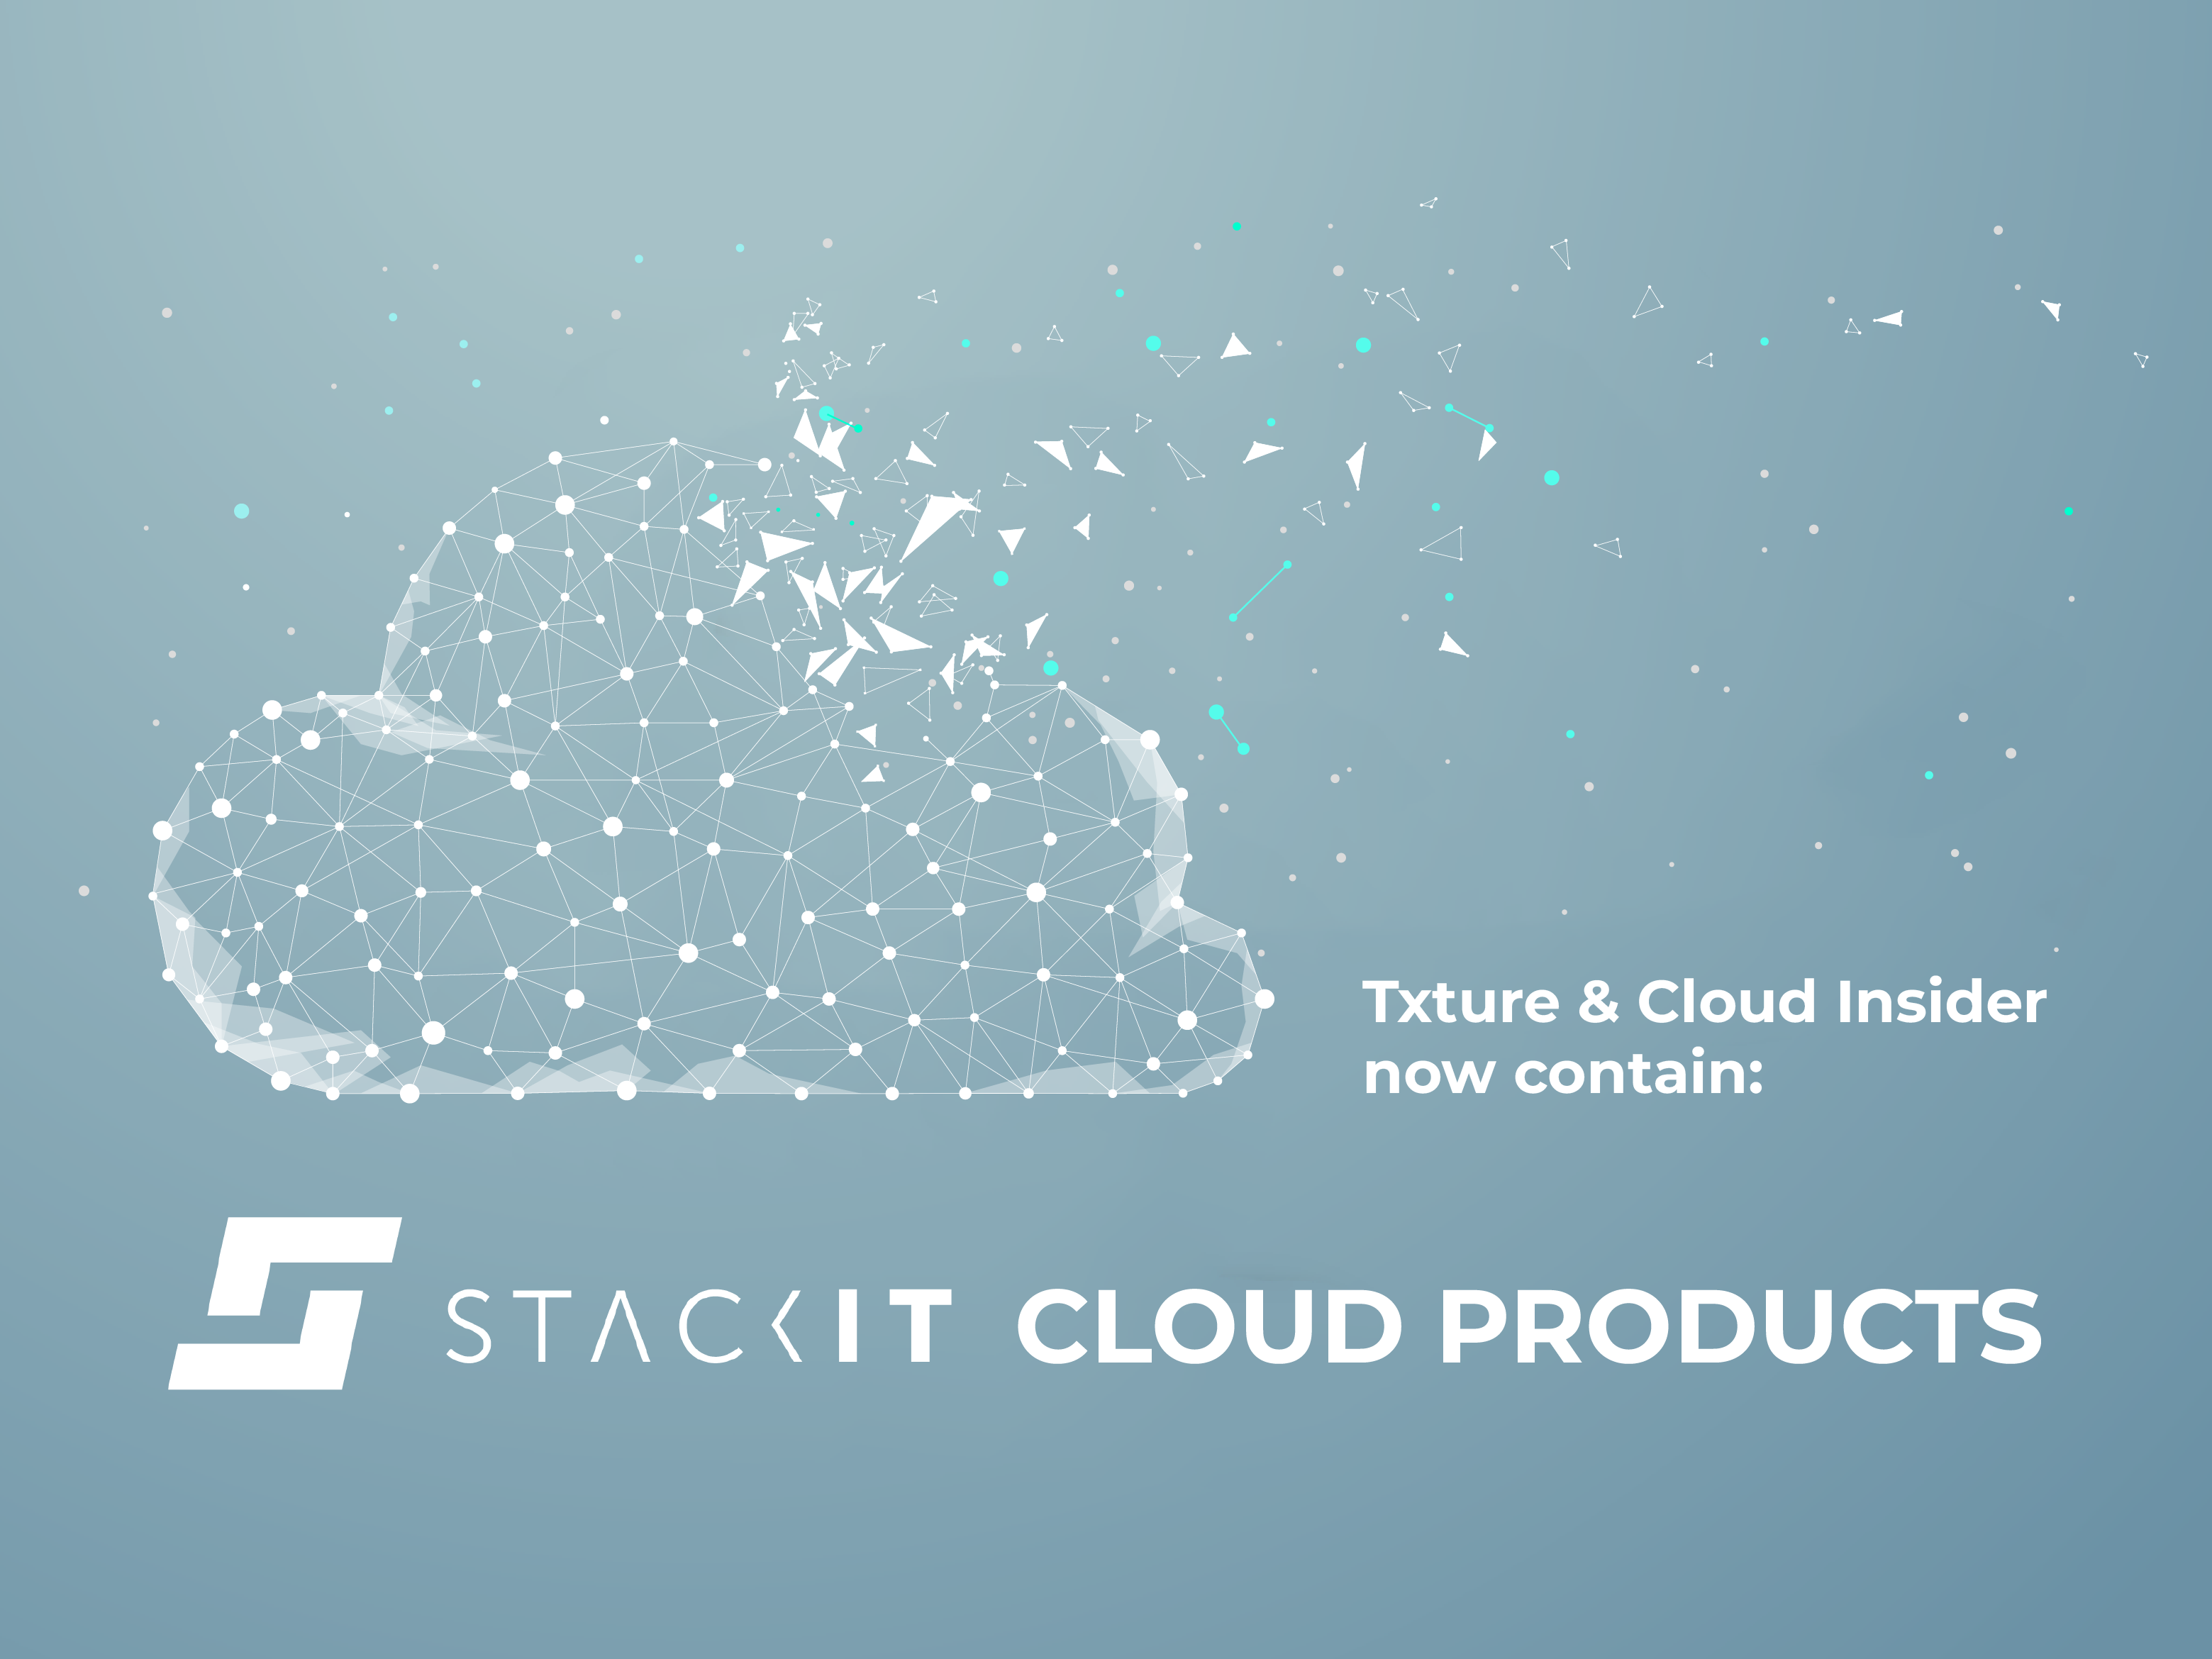 Txture and Cloud Insider now offer STACKIT Cloud Products.